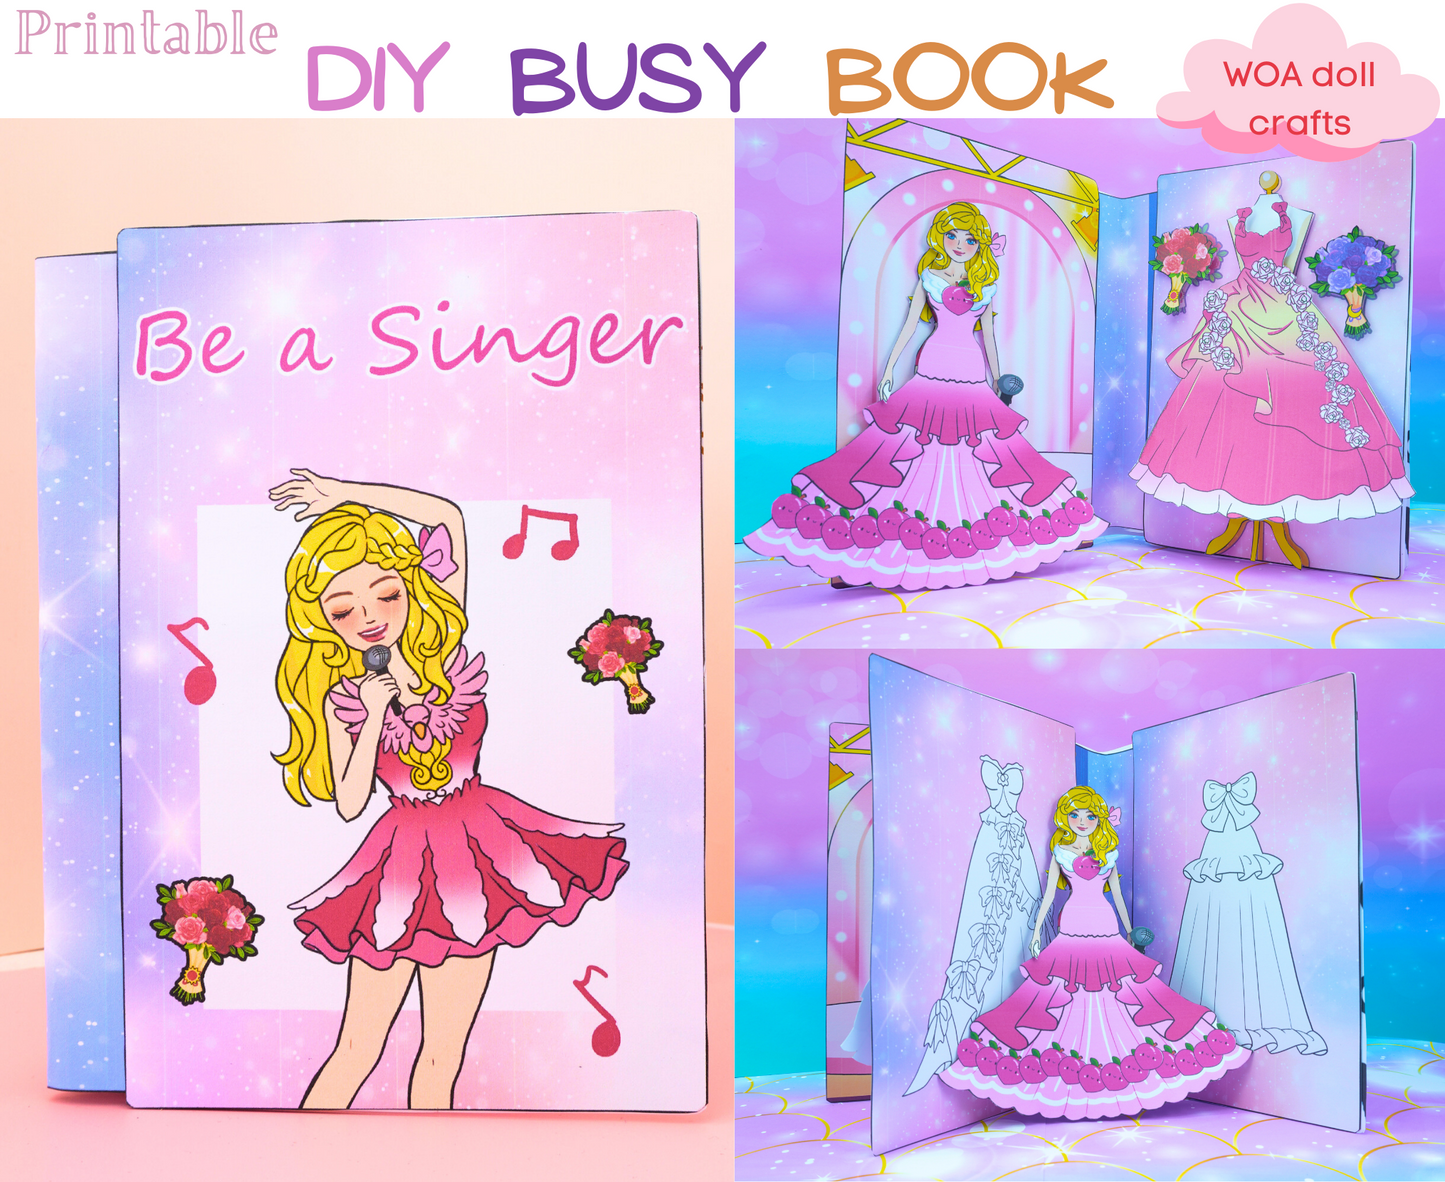 Barbie Singer Printables🎤 Gorgeous wardrobe for Barbie singer dolls | Music accessories for Barbie | Gifts for your little ones who love to sing 🎁  Woa Doll Crafts